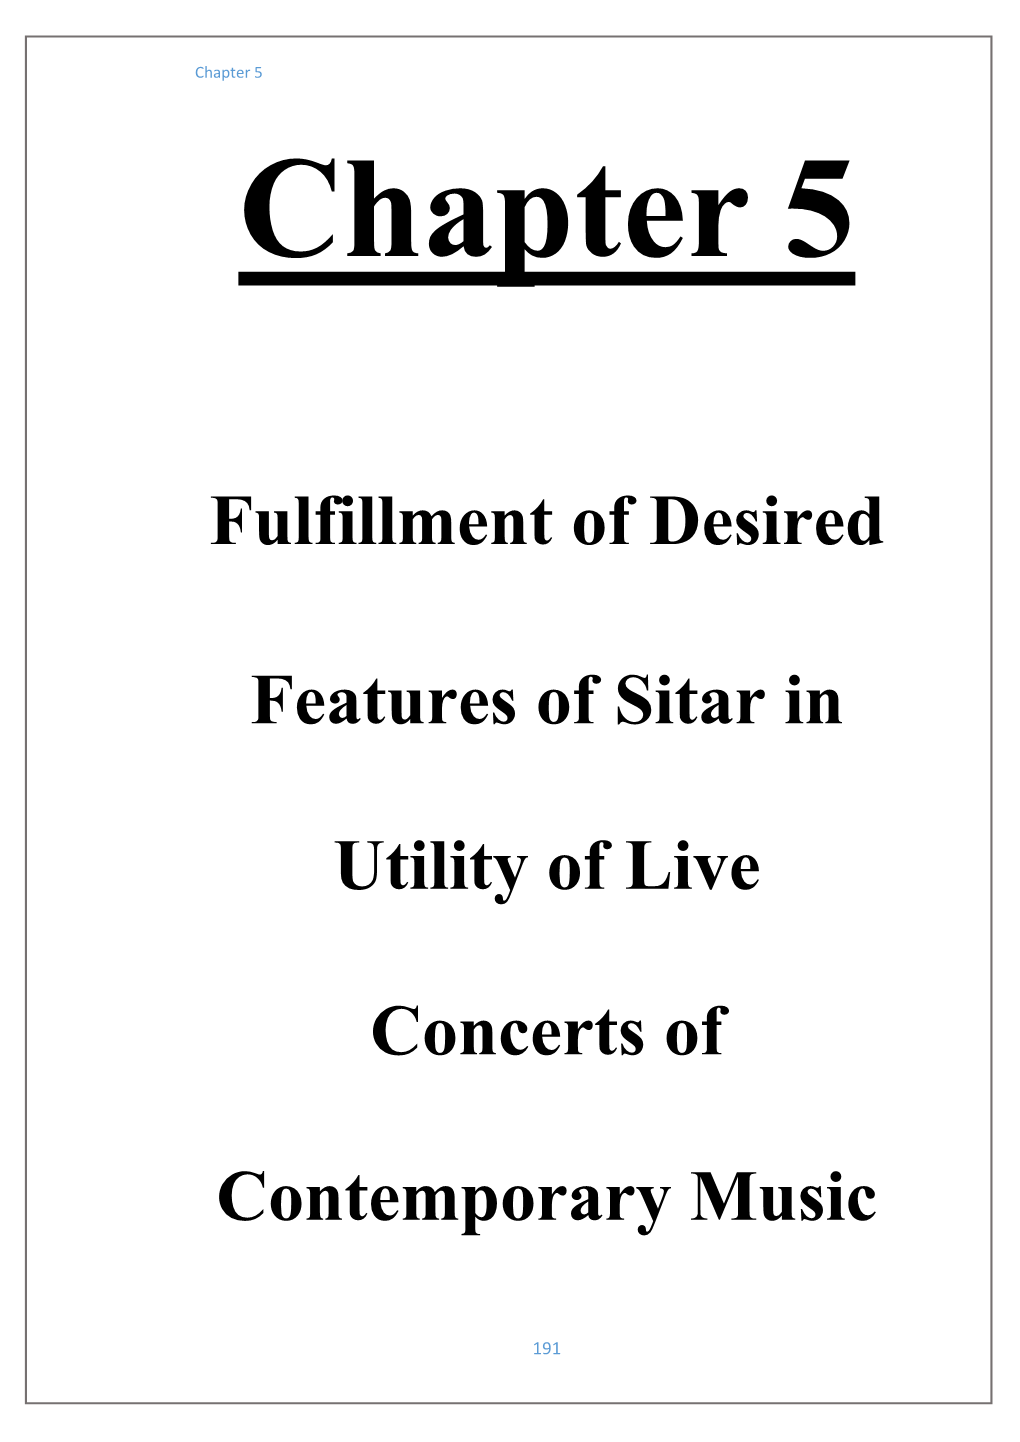 Fulfillment of Desired Features of Sitar in Utility of Live Concerts of Contemporary Music